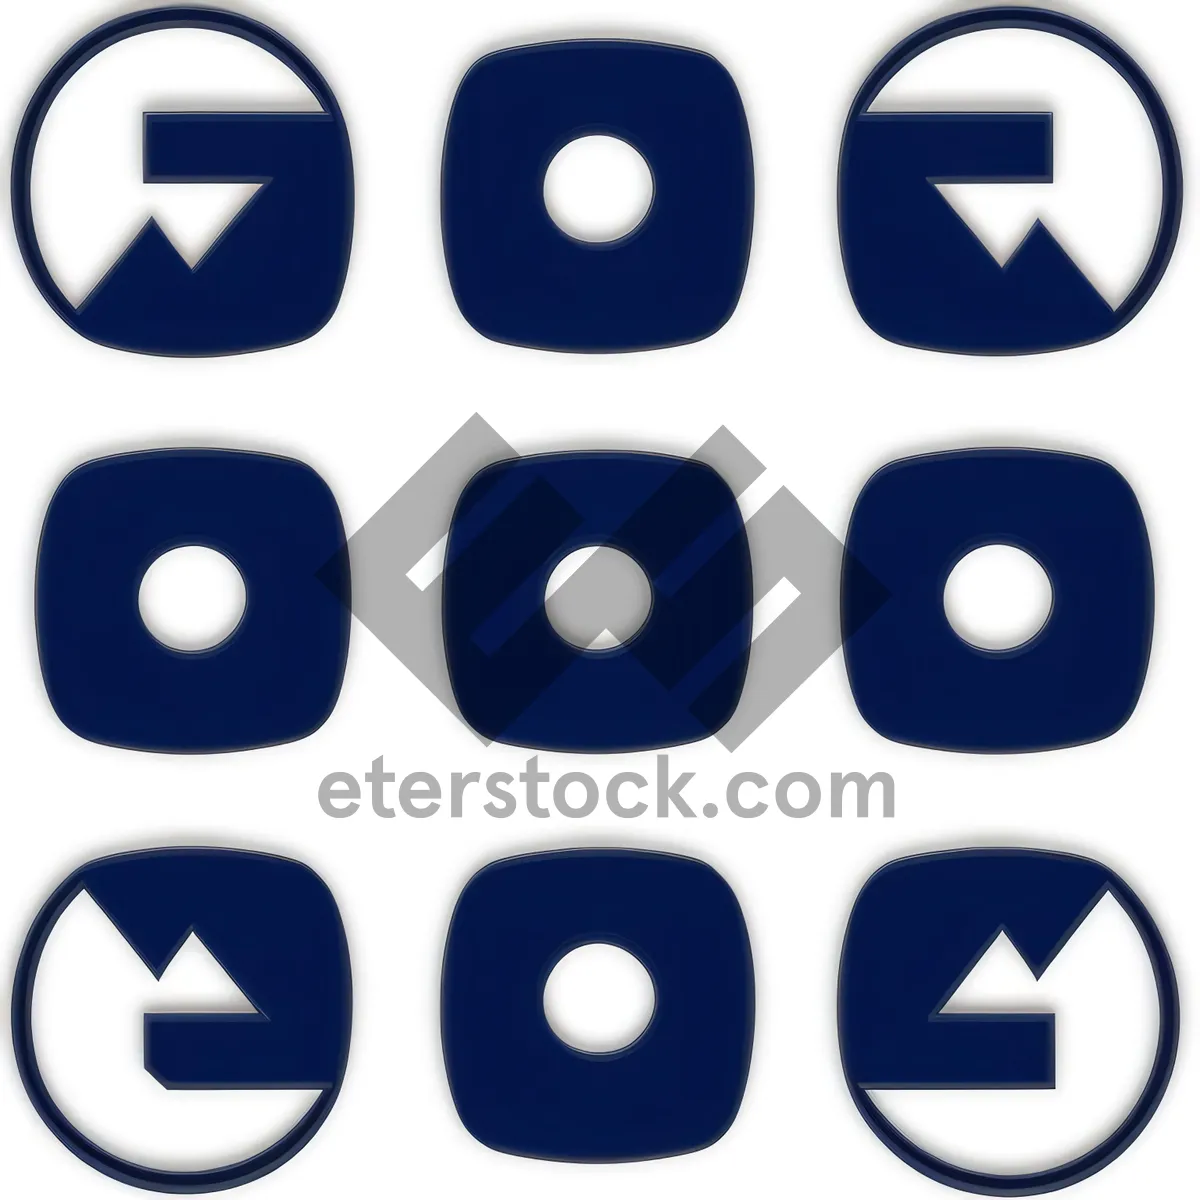 Picture of Glossy Set of Web Icon Buttons